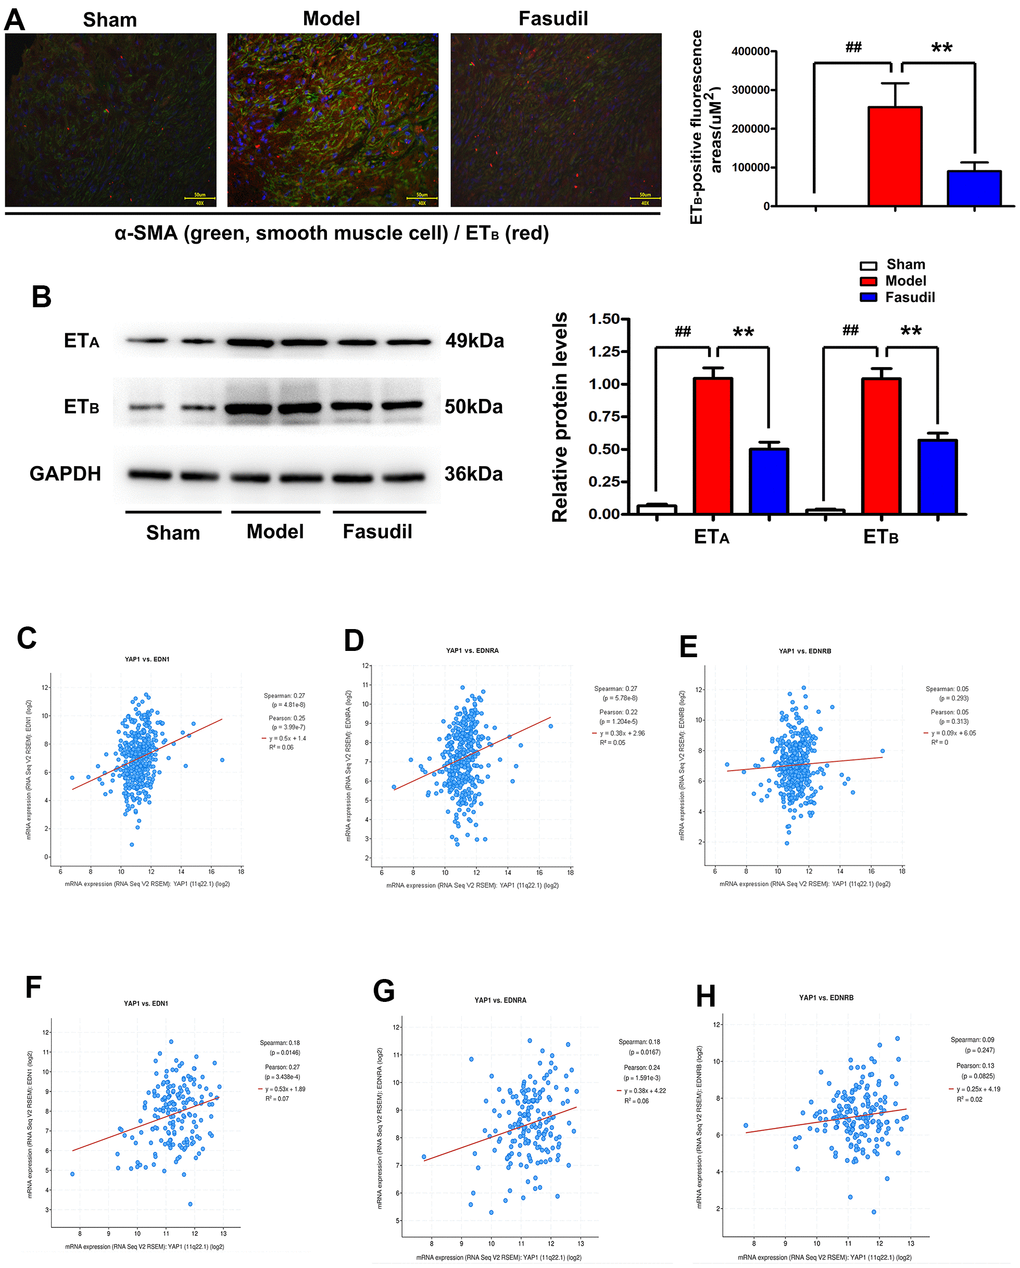 Fasudil restrained the YAP1/ETB/ETA signaling pathway in arterial smooth muscle tissues of rabbits. (A) Immunofluorescence staining indicated decreased immunofluorescence of ETB in Fasudil group compared with that in Model group. Pvs. Model group. (B) Western blotting showed that Fasudil treatment inhibited the expressions of ETA and ETB proteins. (C–E) Co-expression analysis revealed that YAP1 was significantly correlated with EDN1 (ETA) and EDN2 (ETB) based on the data from the GSE60887 dataset. Pvs. Sham group. (F–H).